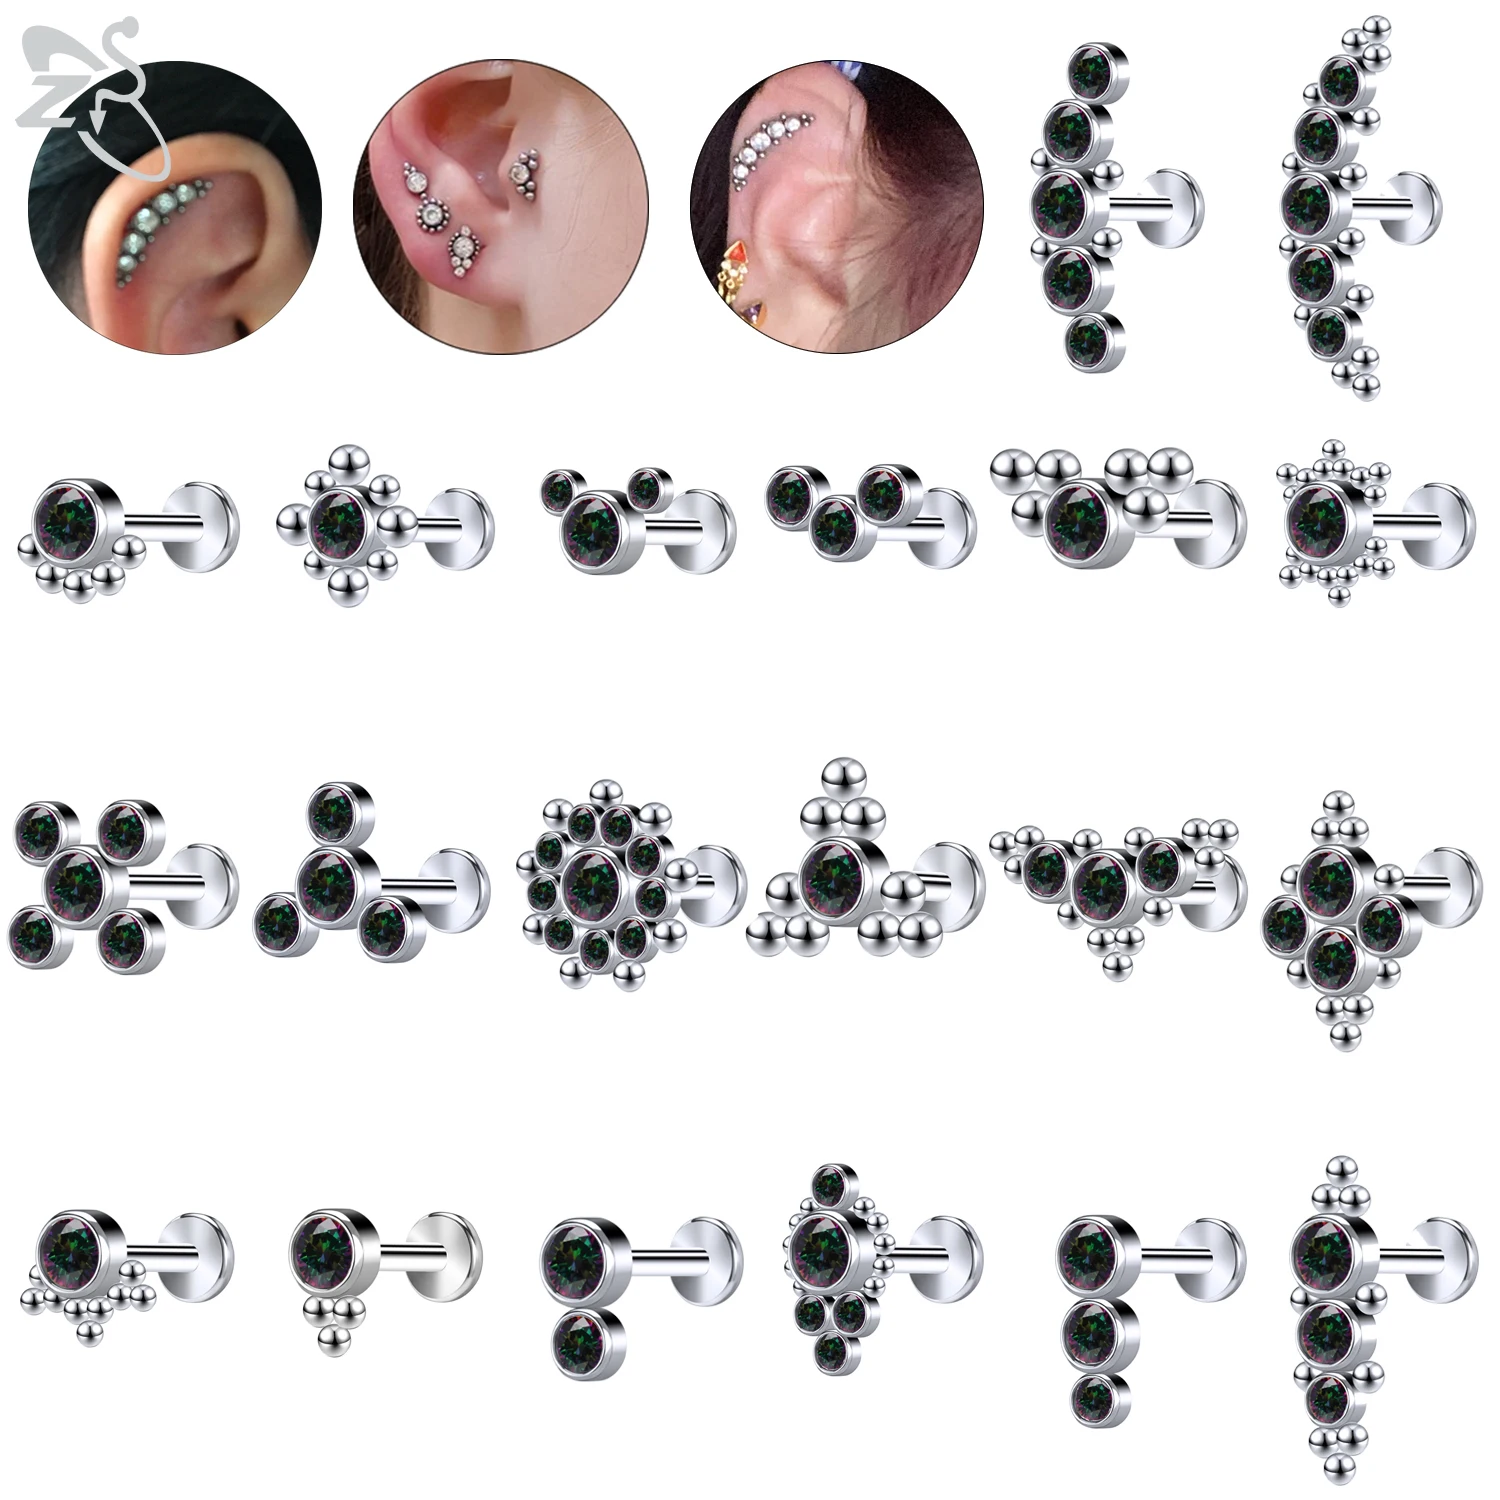 

ZS 1PC 16G 316L Stainless Steel Labret Piercing Screw Lip Stud CZ Crystal Ear Cartilage Tragus Helix Conch Piercings Jewelry 8MM